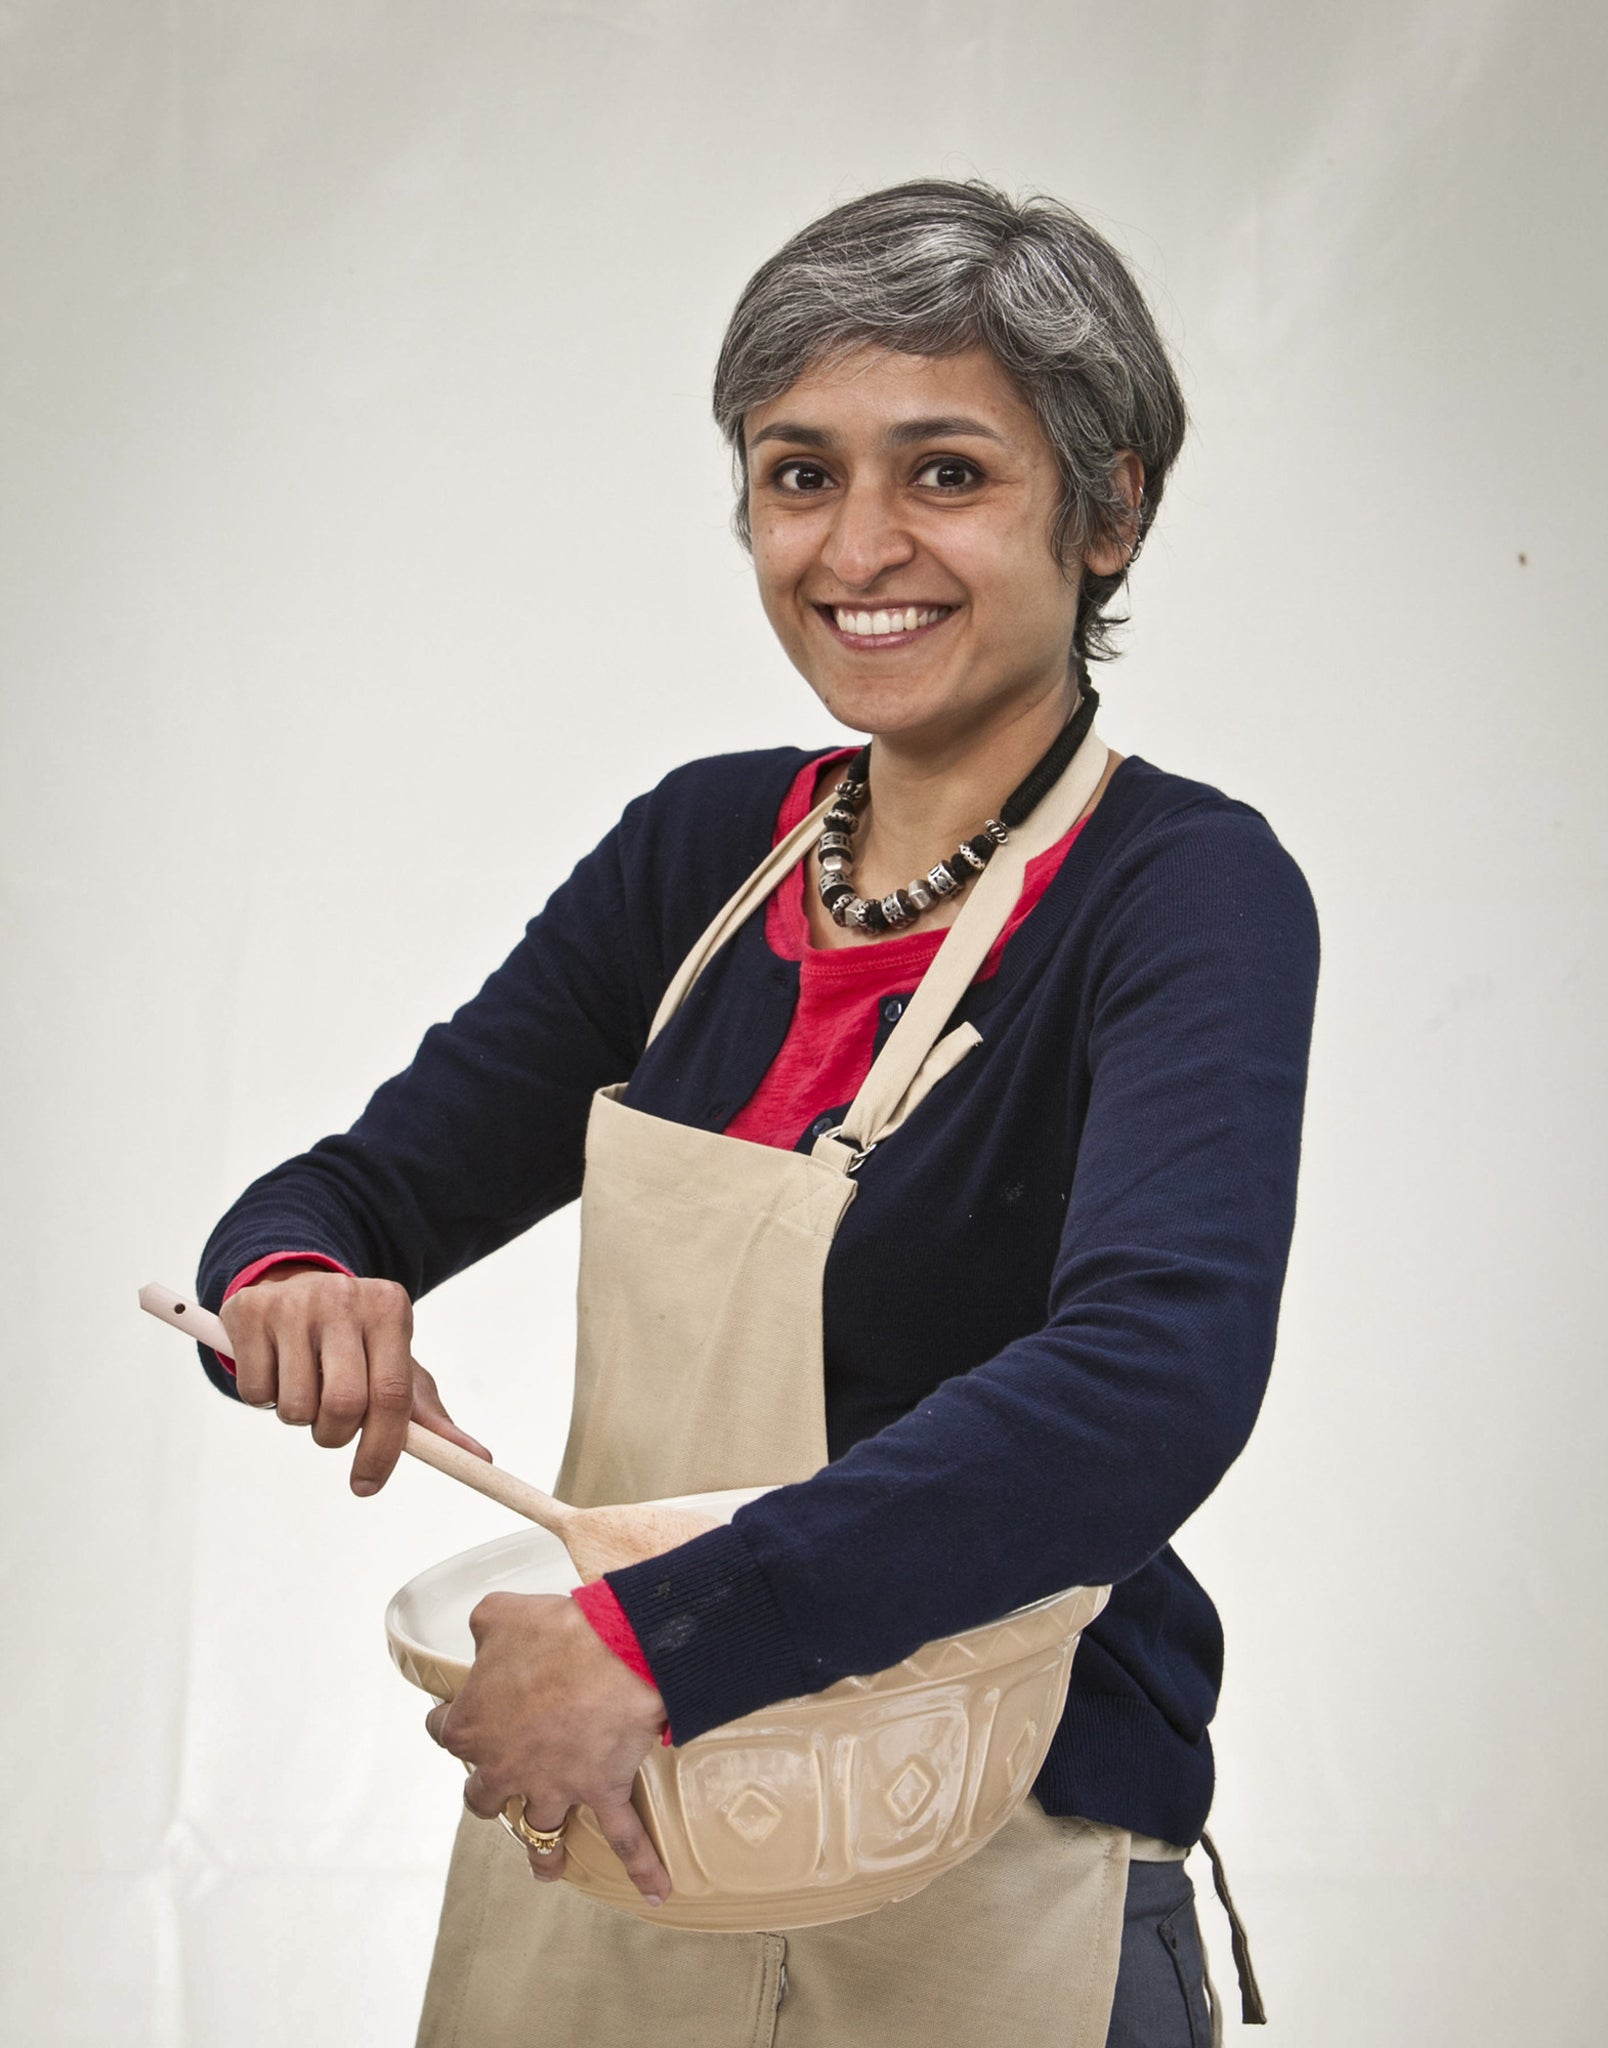 Chetna from the Great British Bake Off 2014